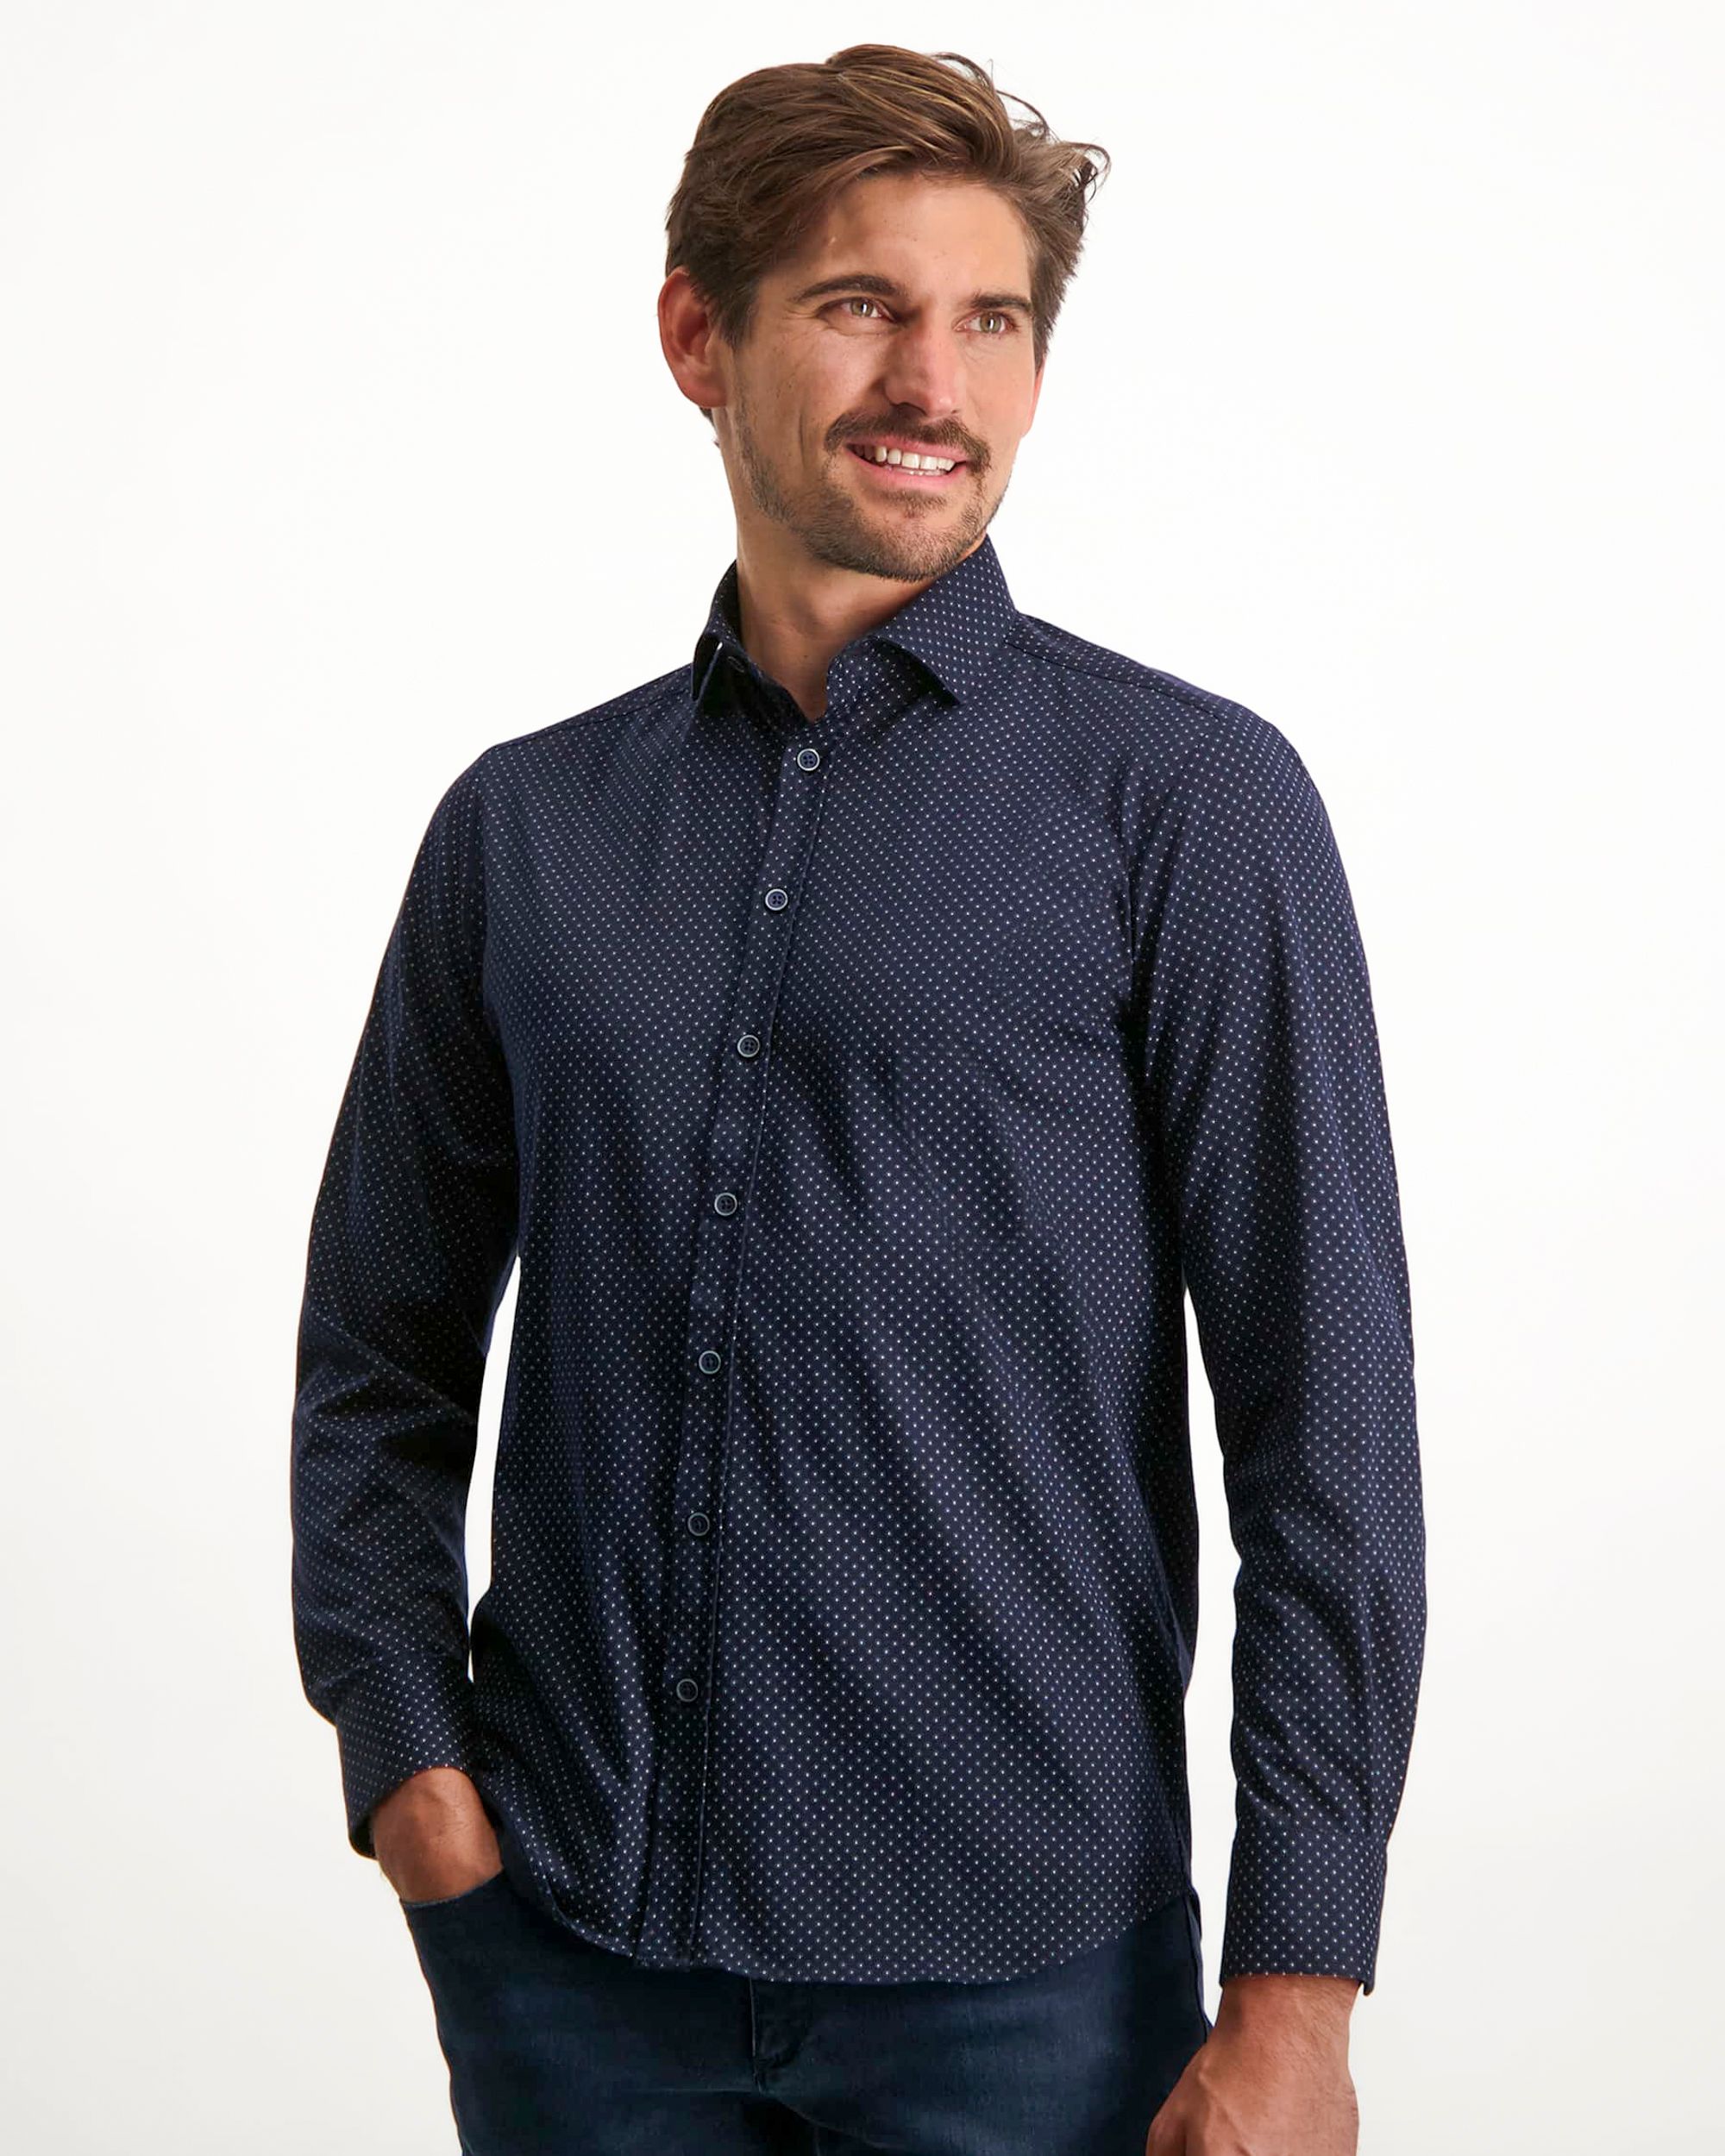 State of Art Casual Overhemd LM Blauw 081160-001-4XL